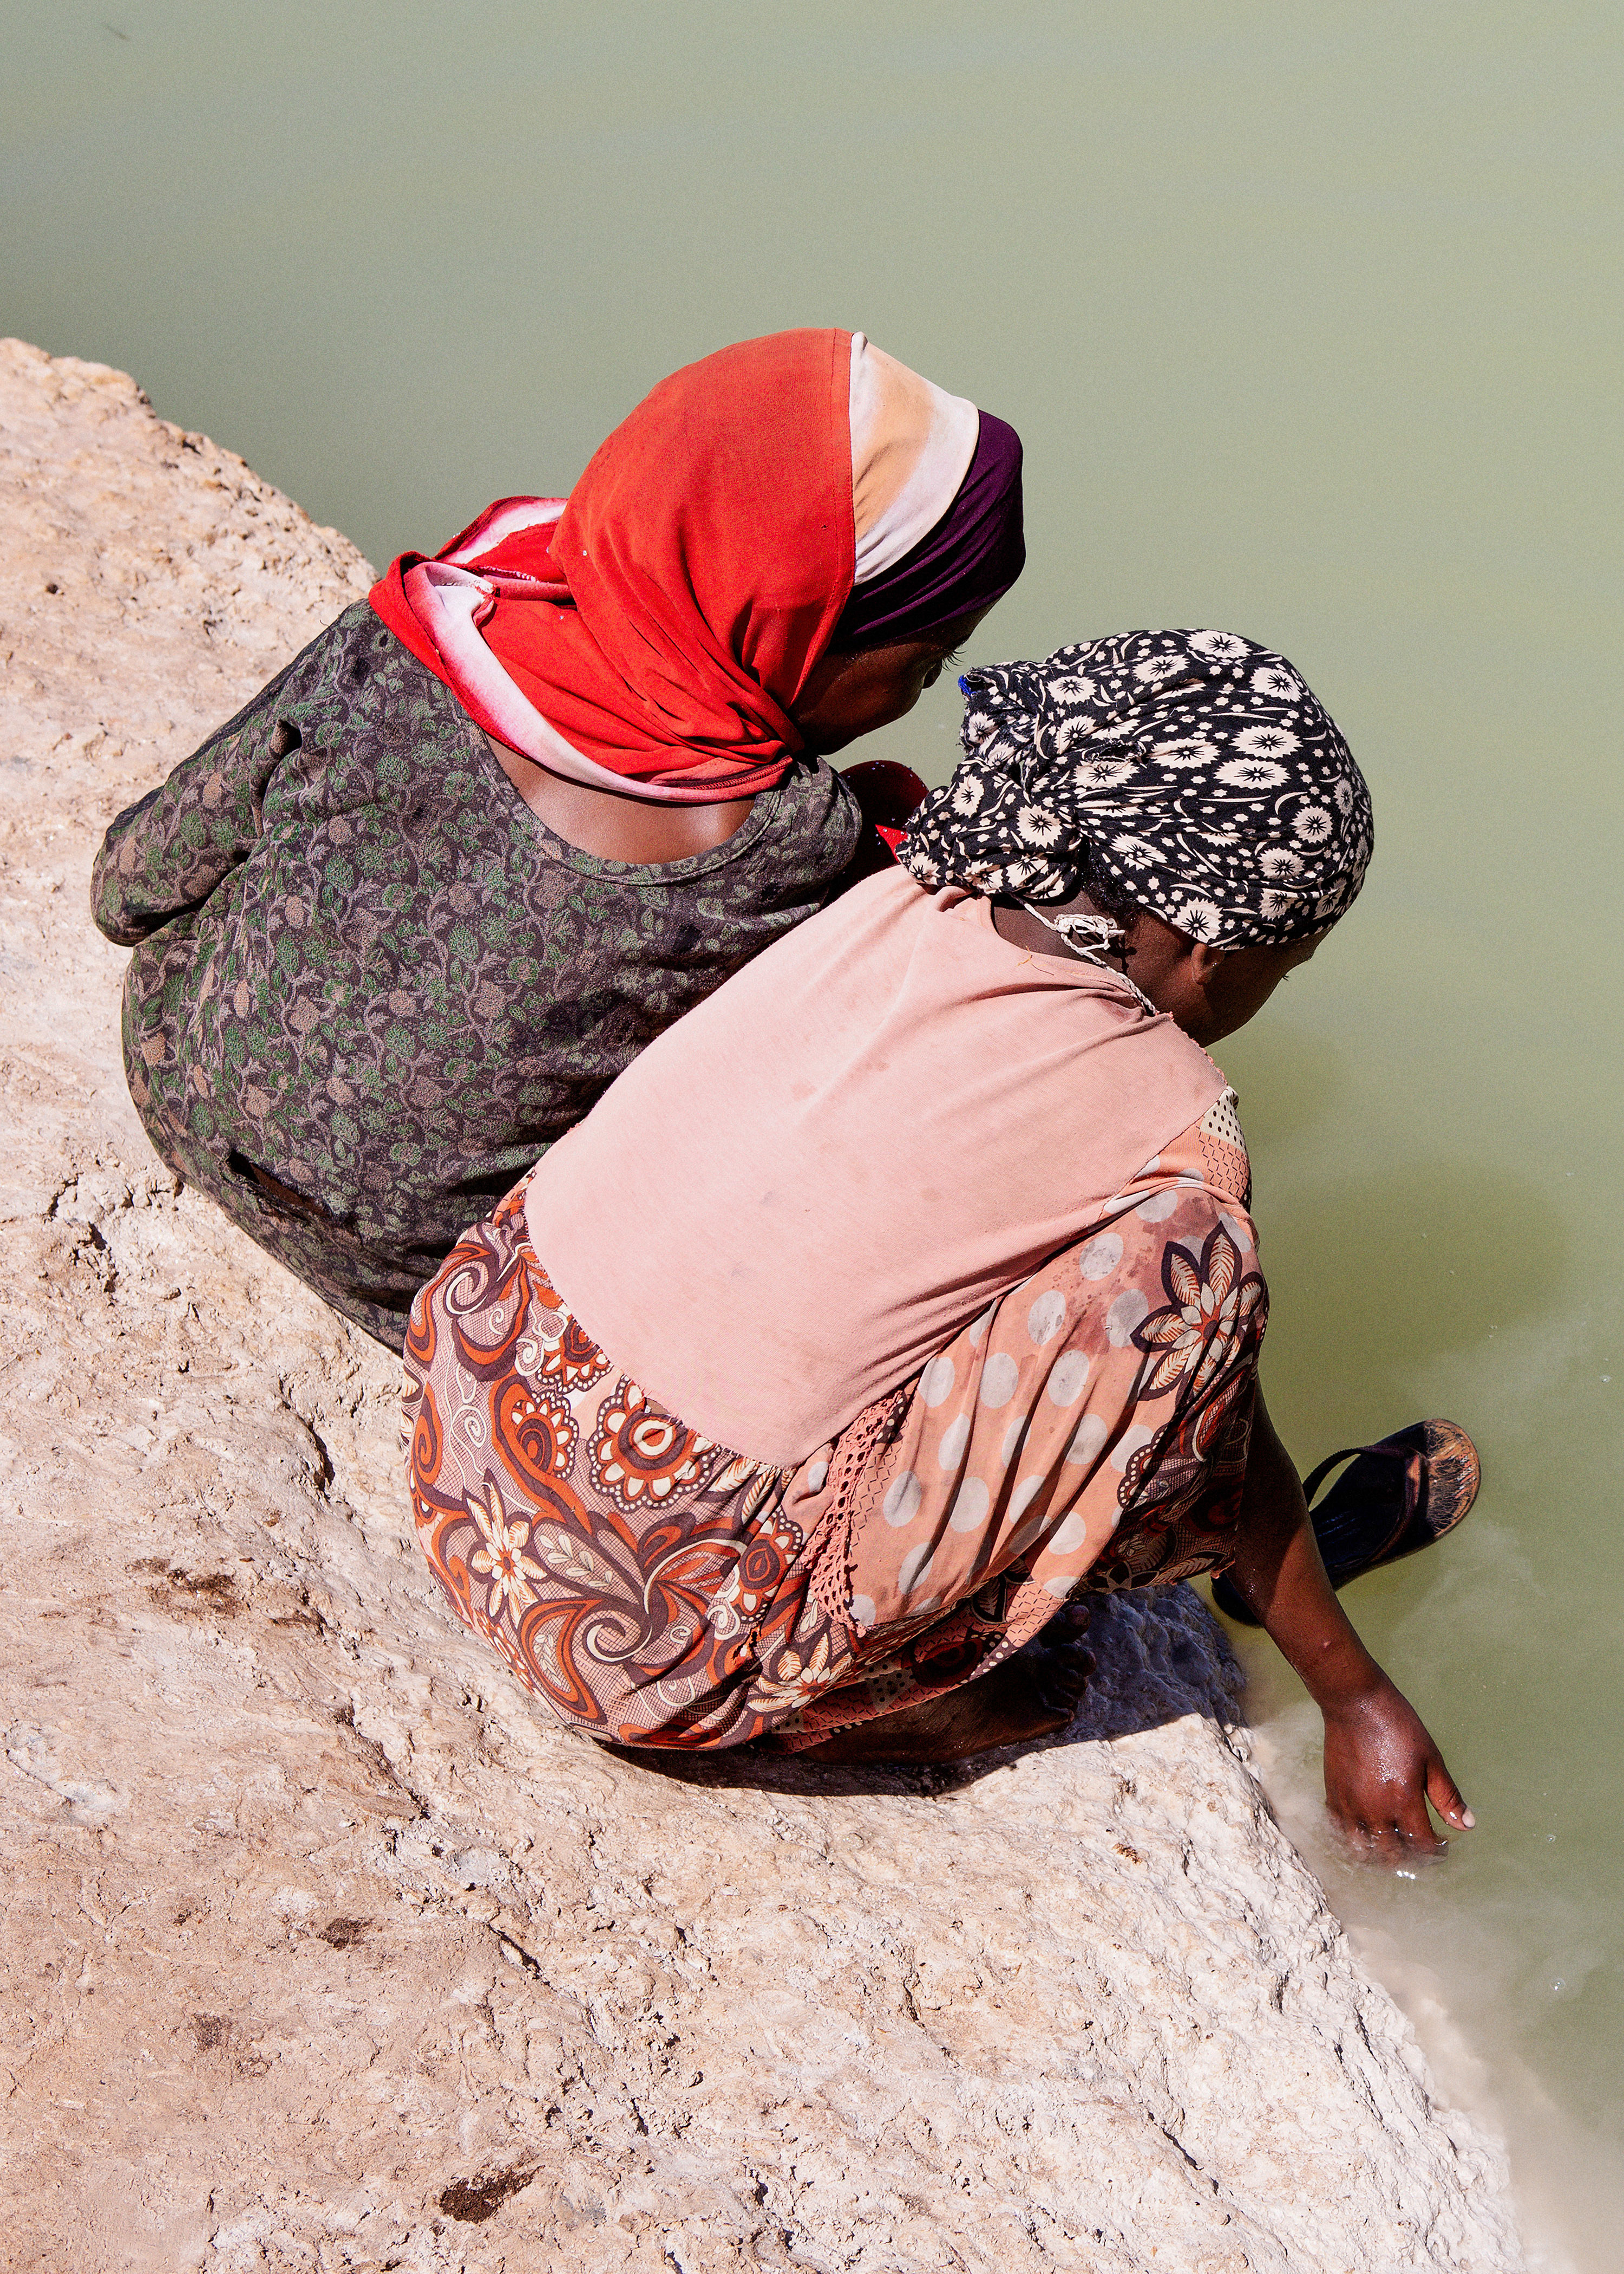 Two women looking into the water